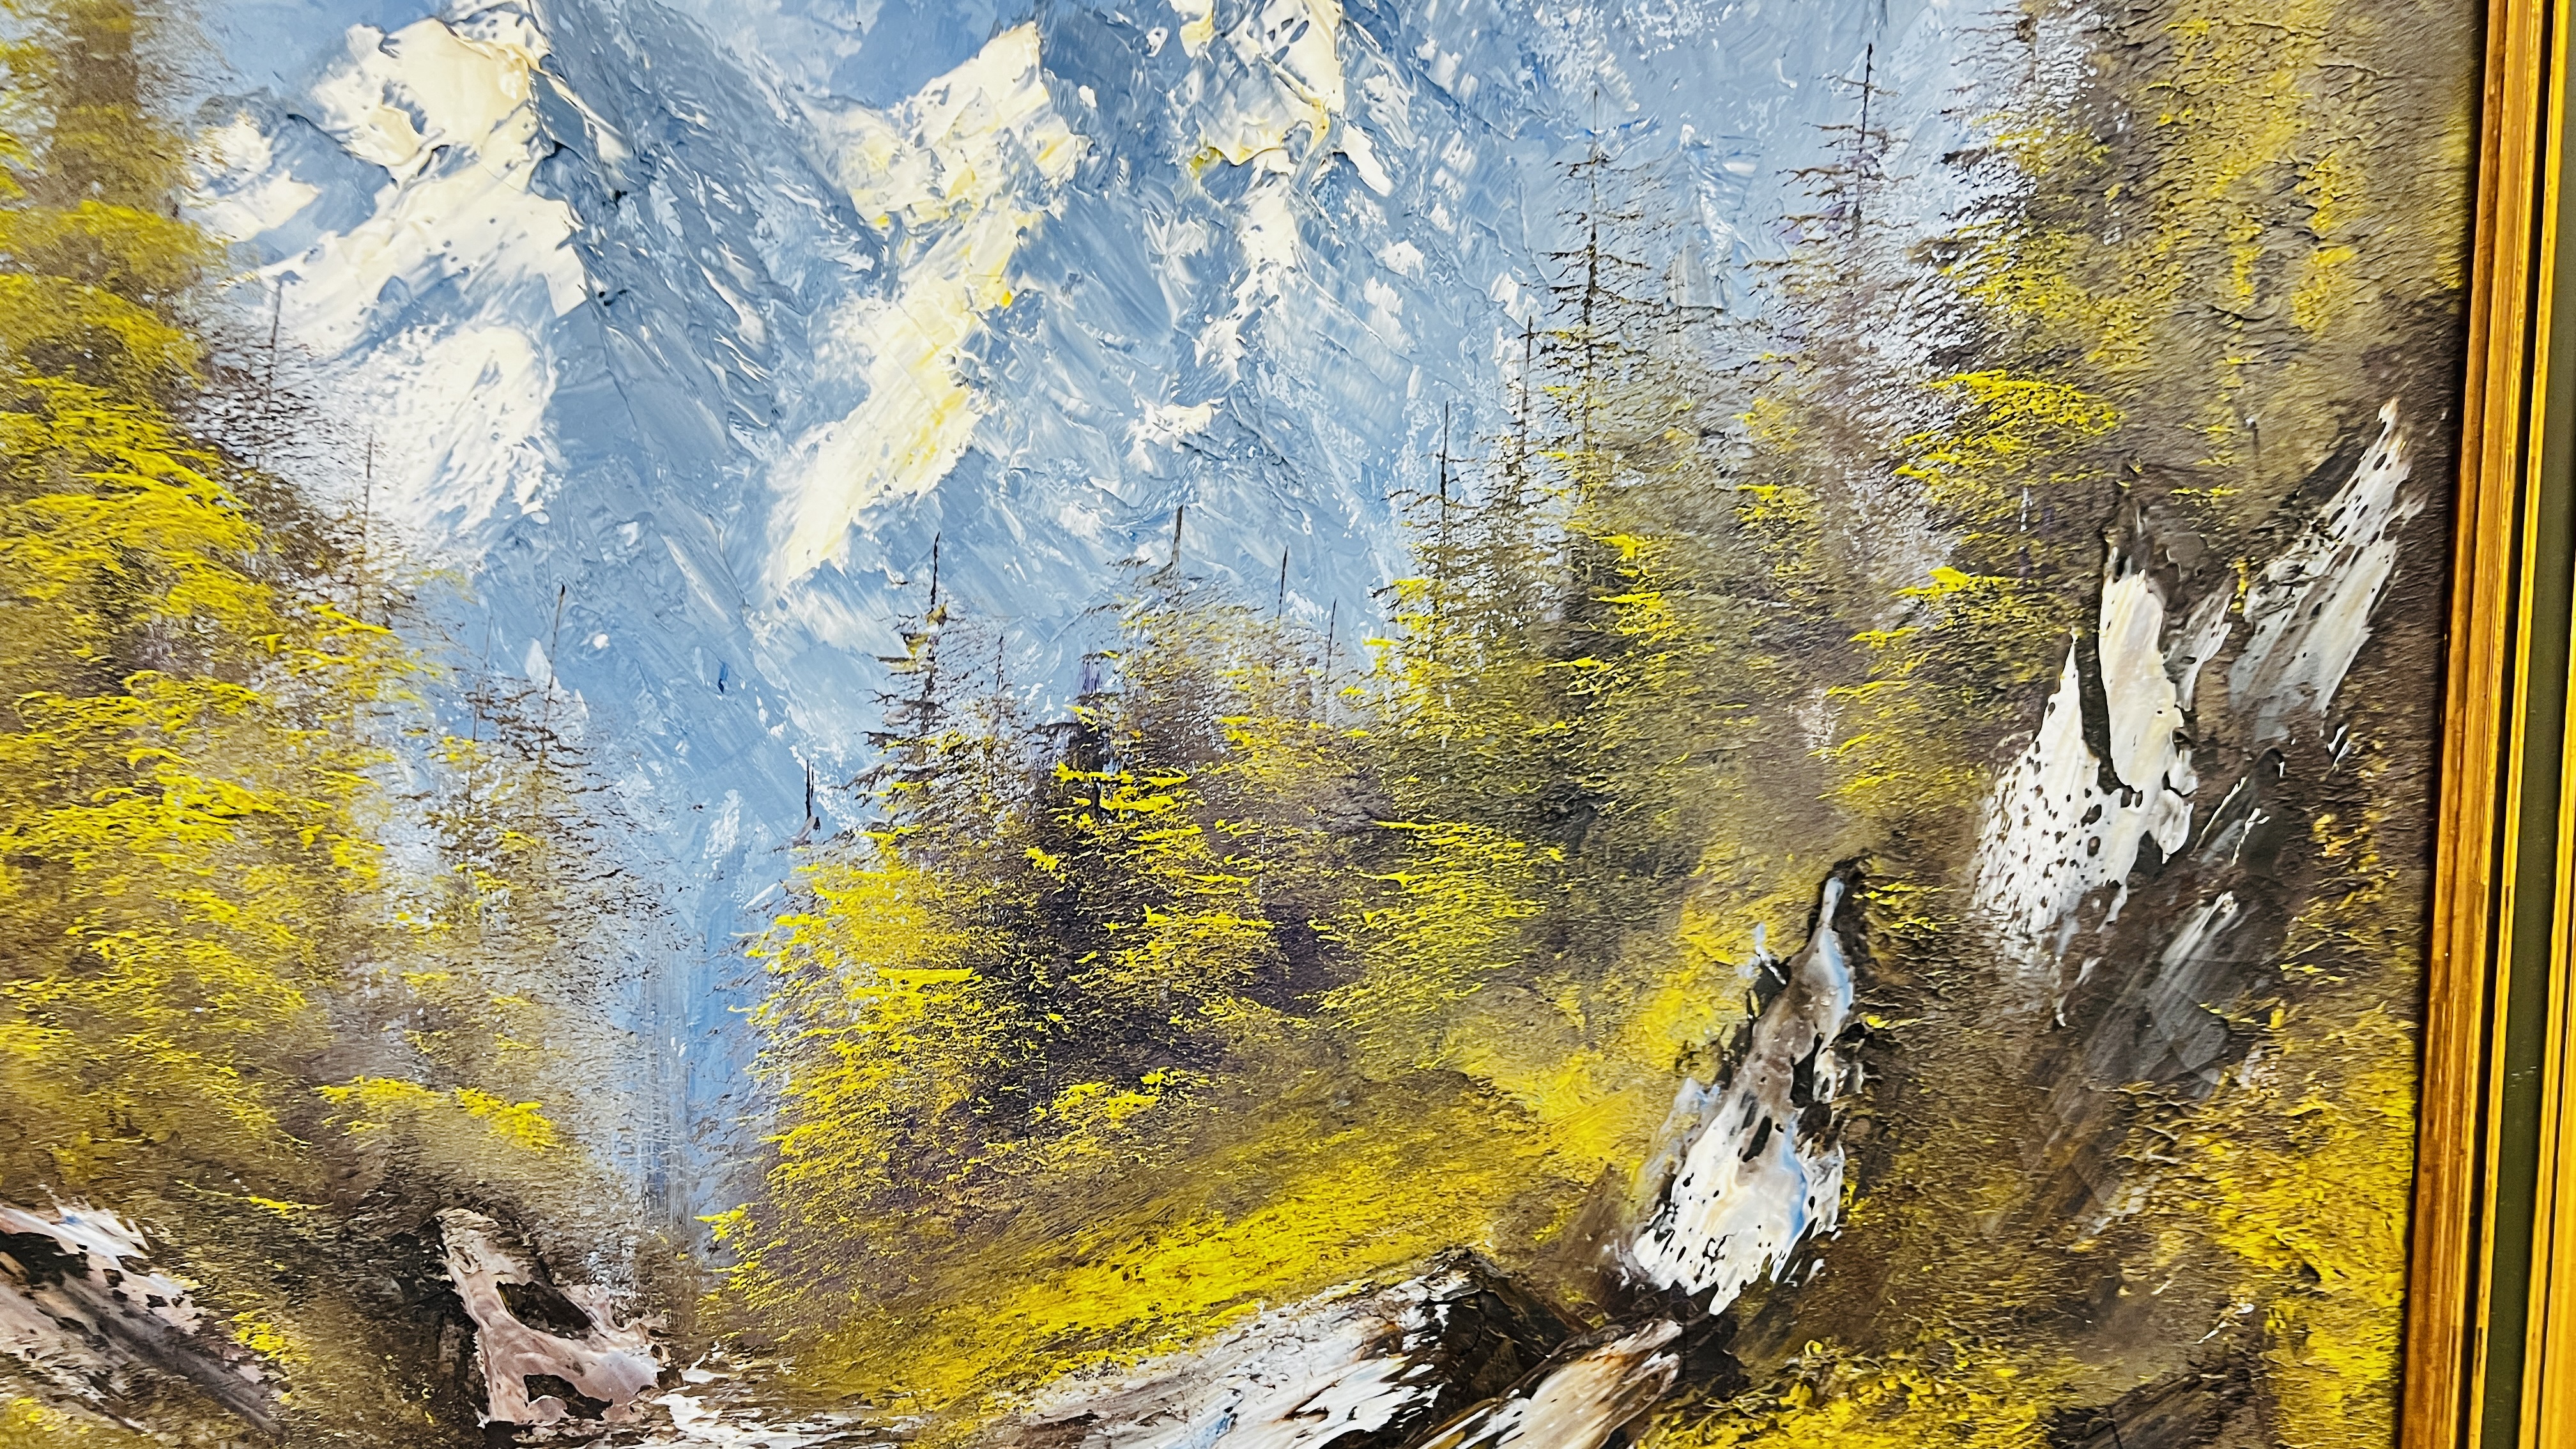 OIL ON CANVAS OF ALPINE RIVER MOUNTAIN SCENE BEARING SIGNATURE TERRY EVANS 70CM X 90CM. - Image 4 of 7